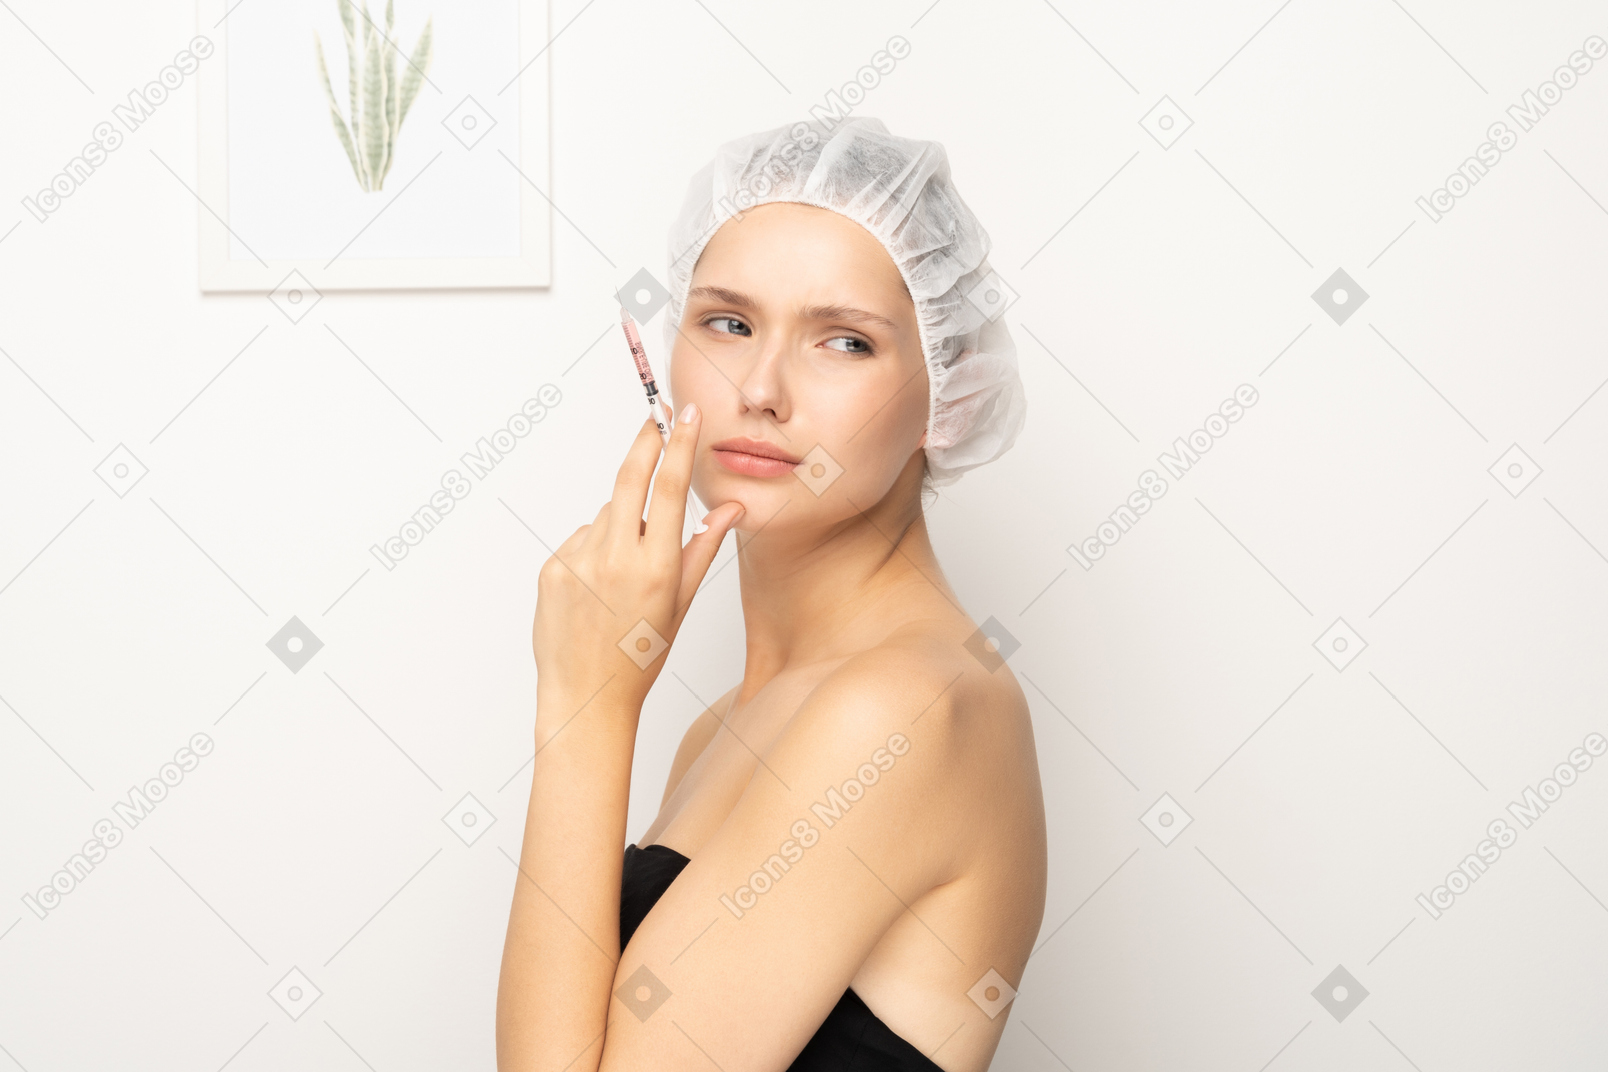 Woman standing with syringe